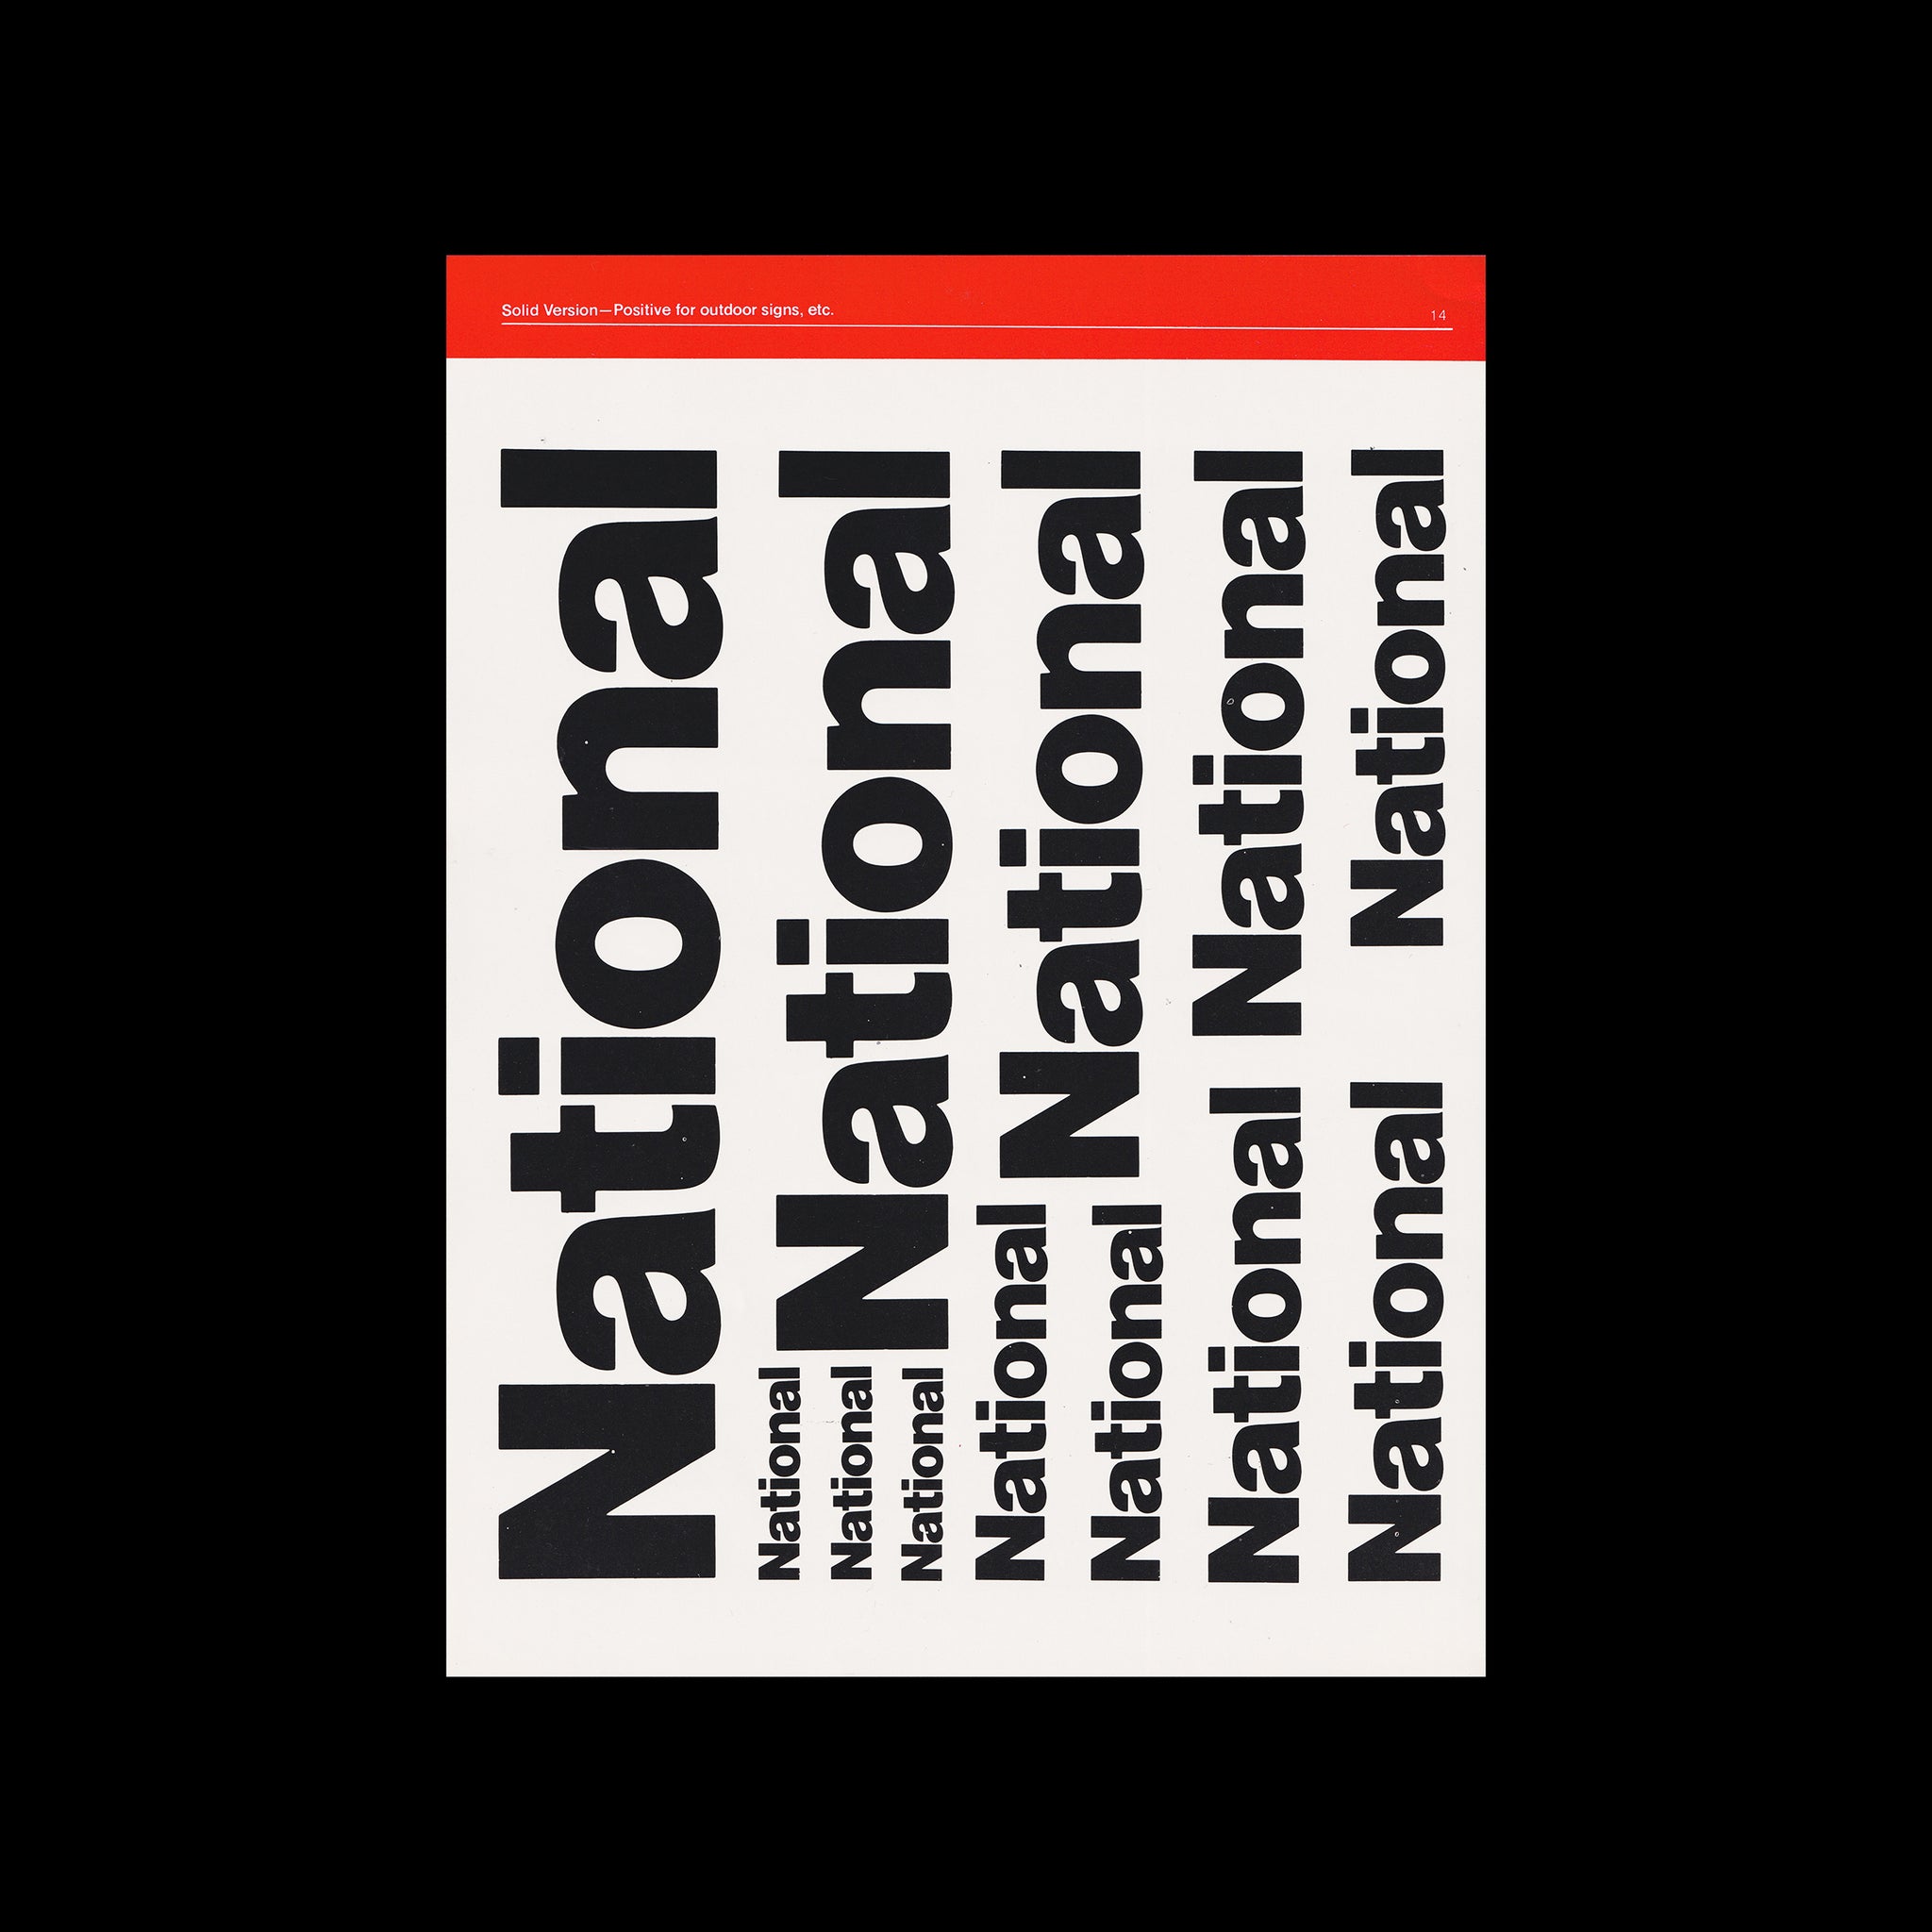 National Brand Identity Guidelines, 1973